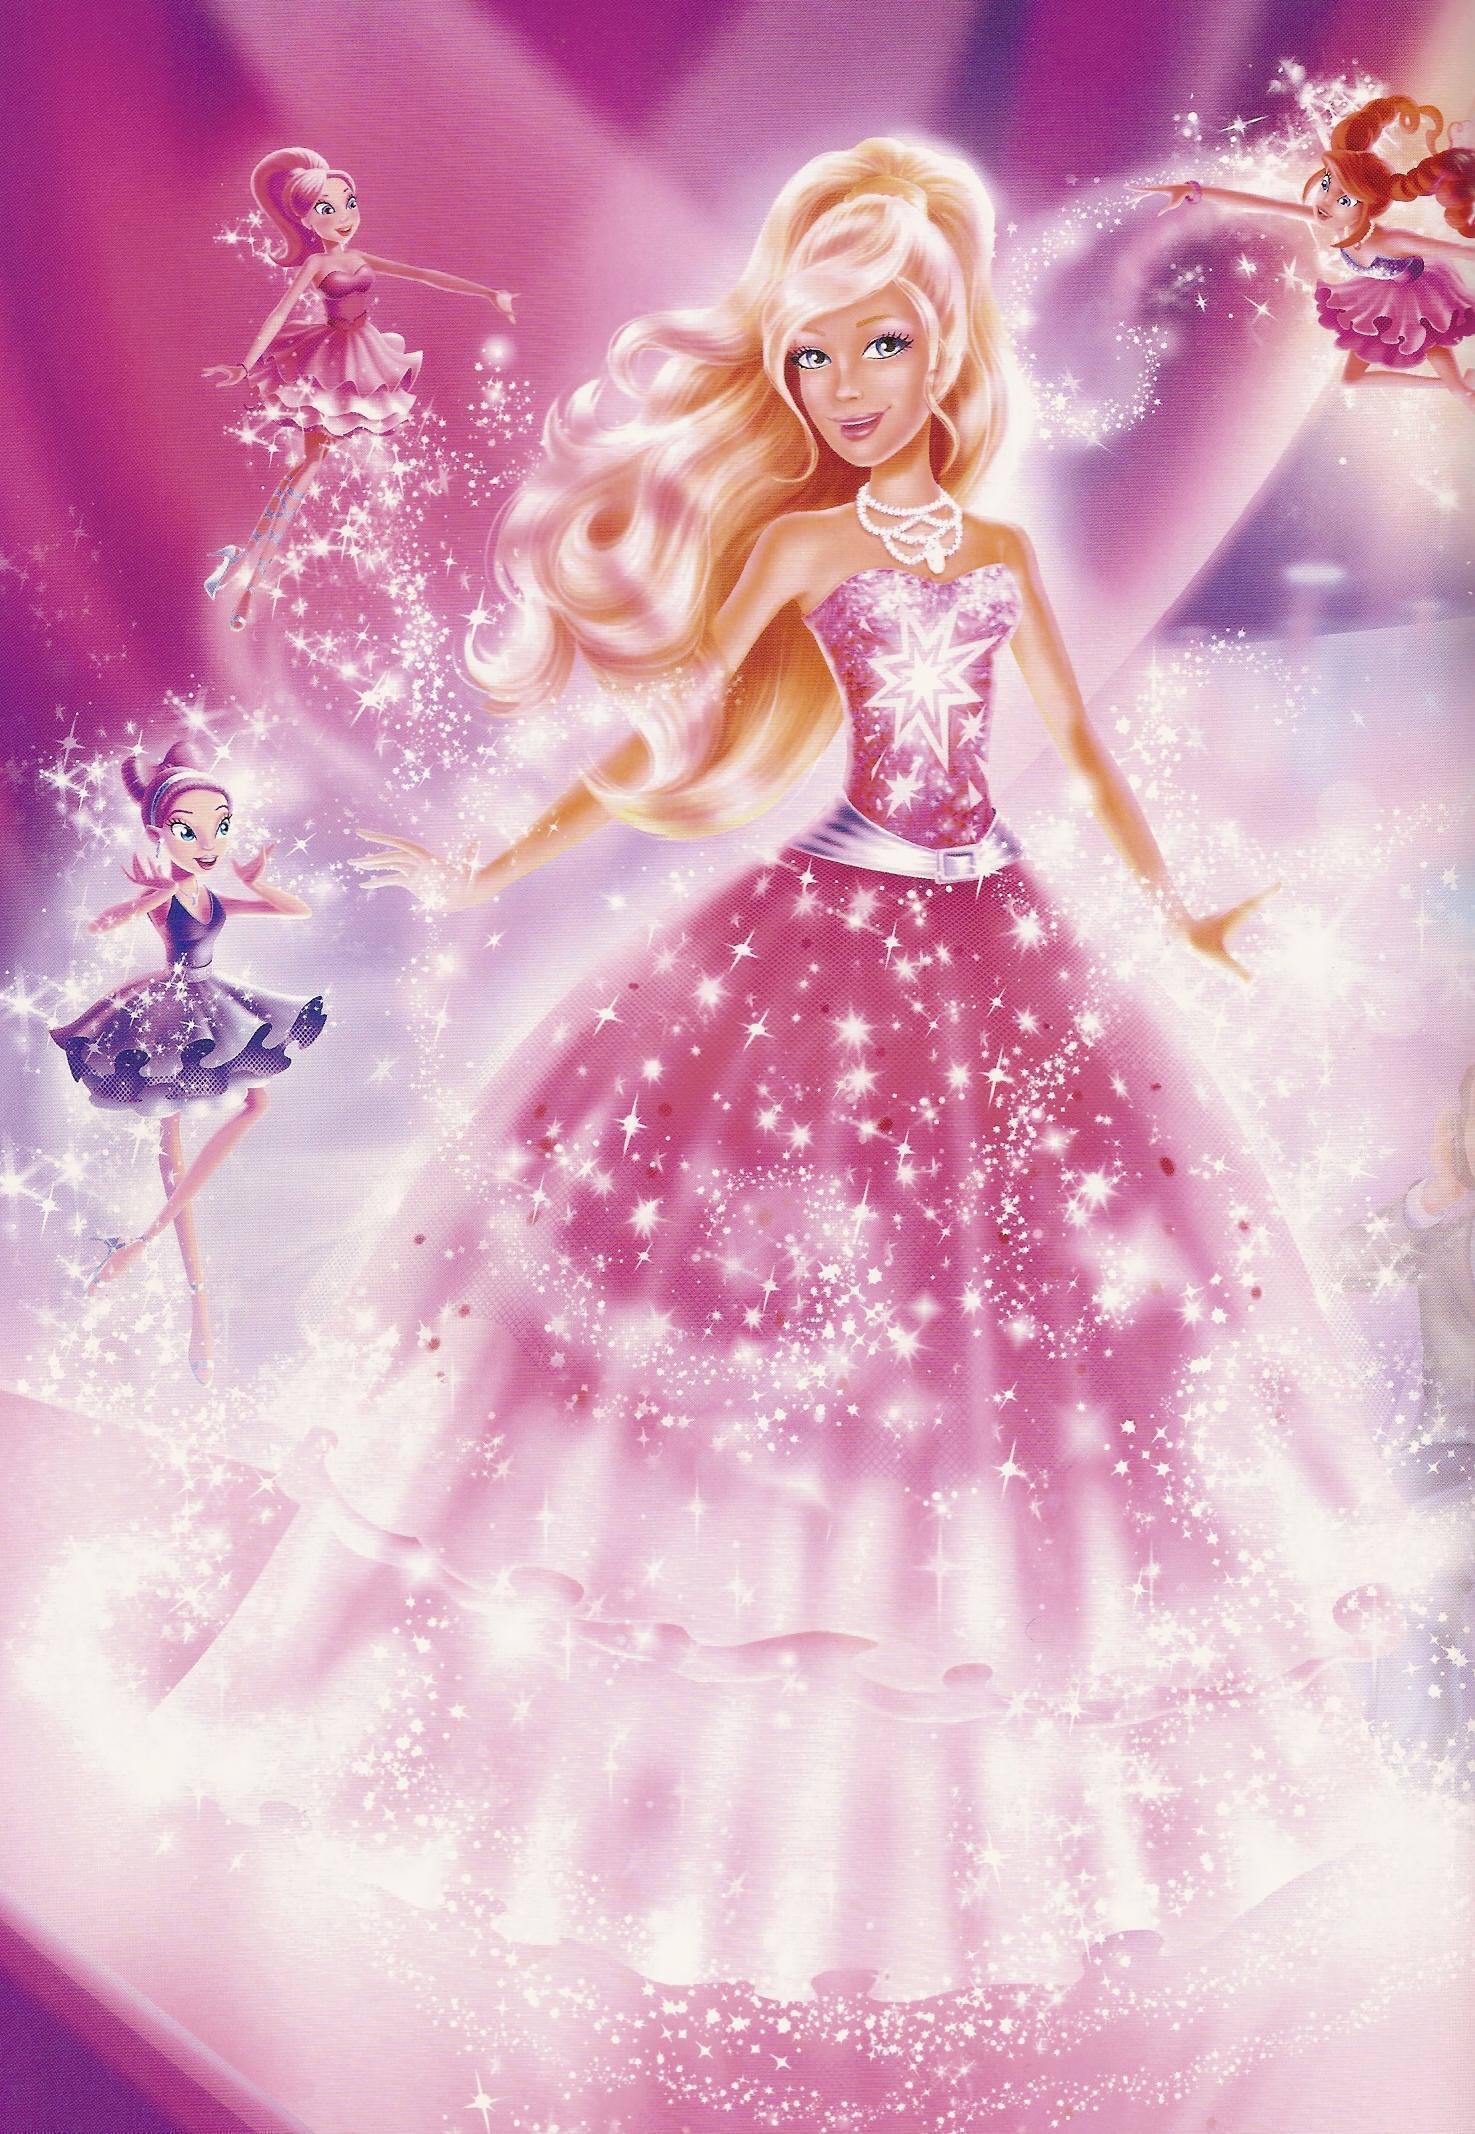 Wallpapers Barbie Fashion - Wallpaper Cave